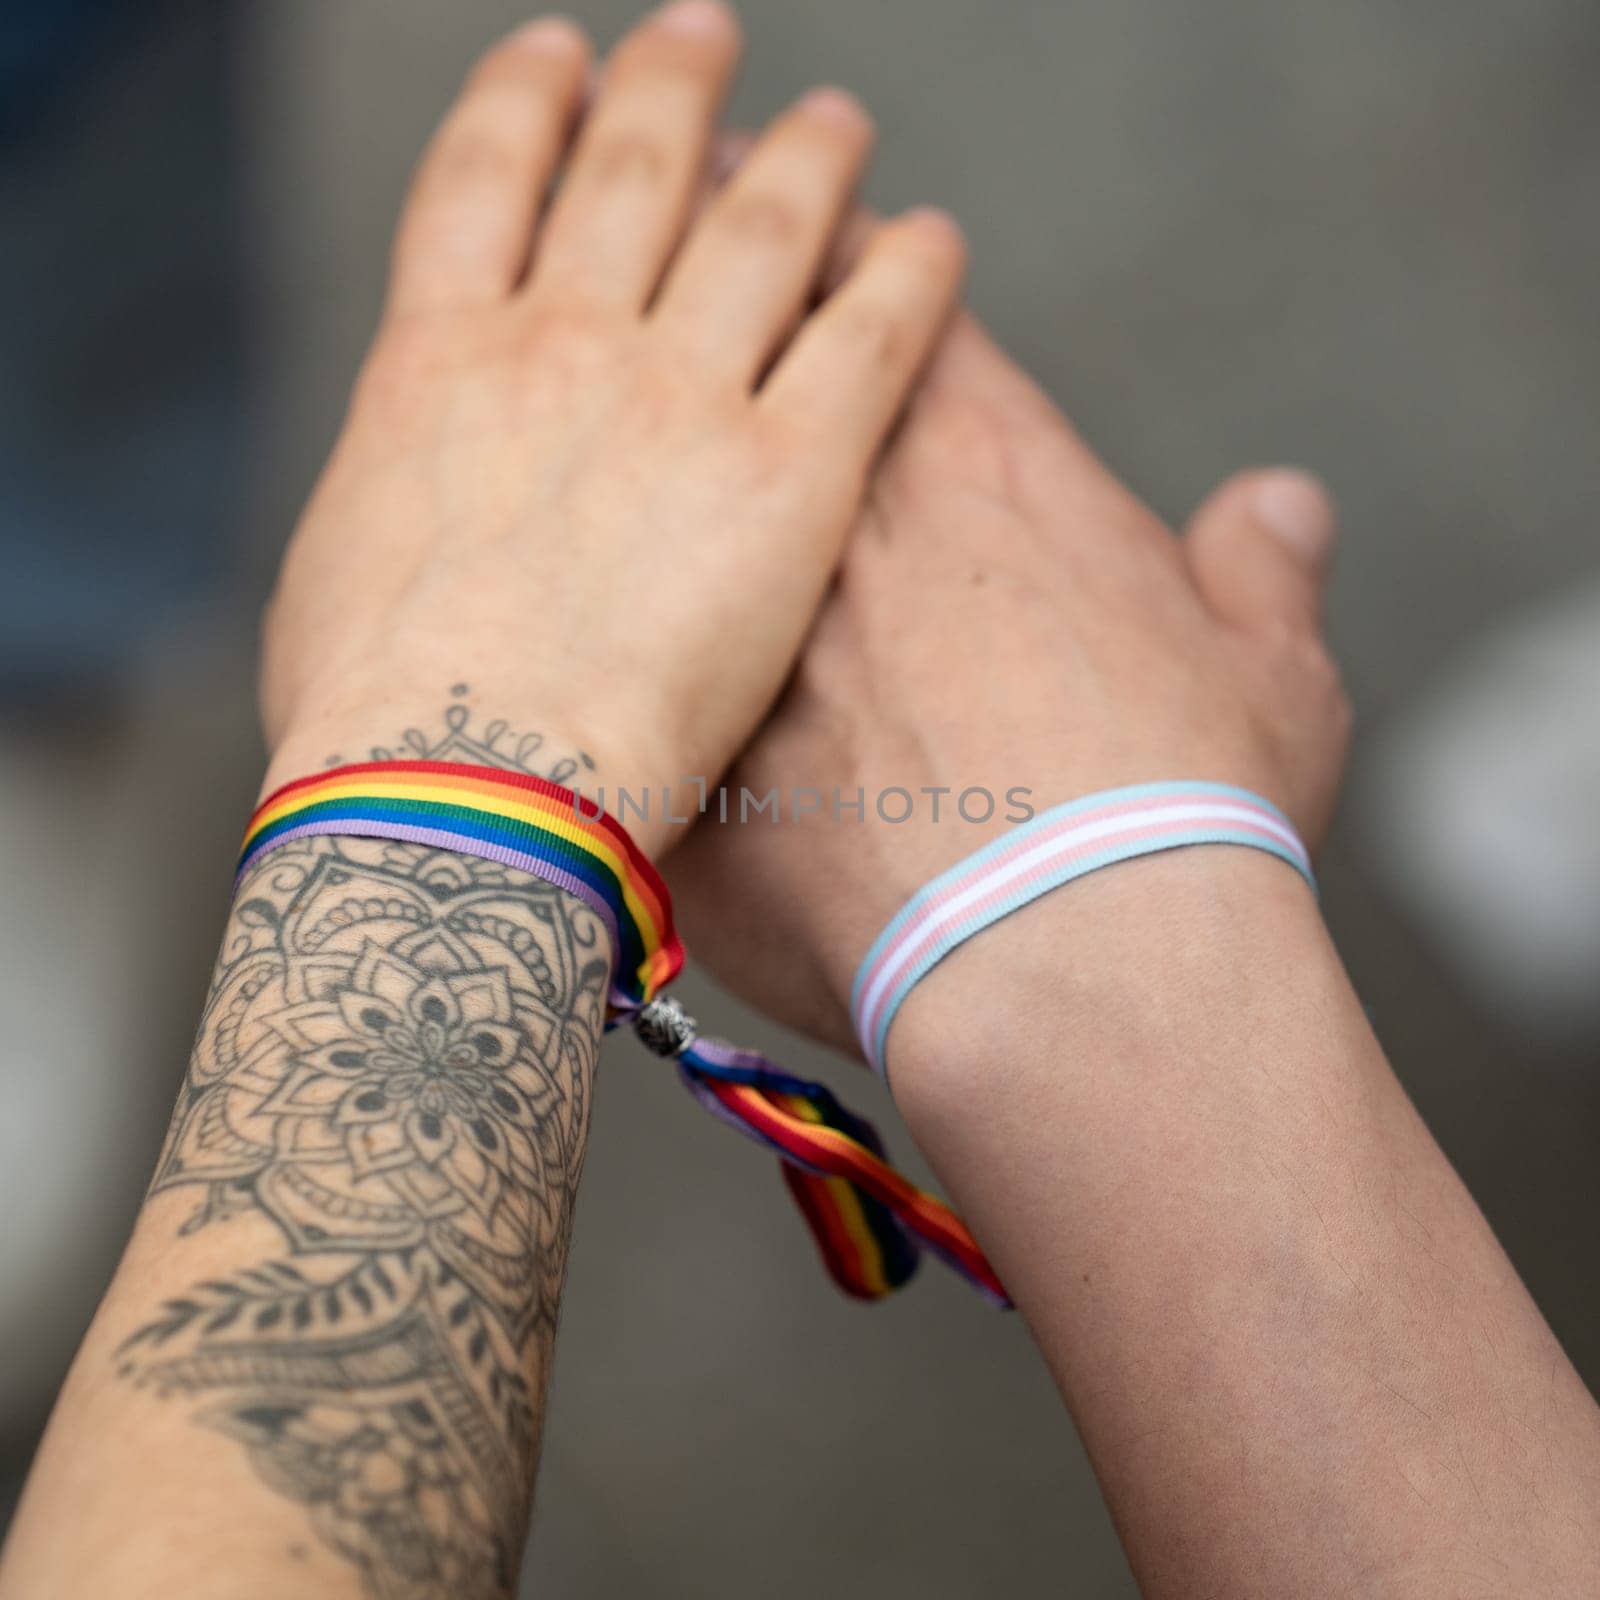 Hands of lesbian women with a ribbon of LGBT rainbow colors tied together. LGBT pride concept, LGBTQ people, lgbt rights campaign